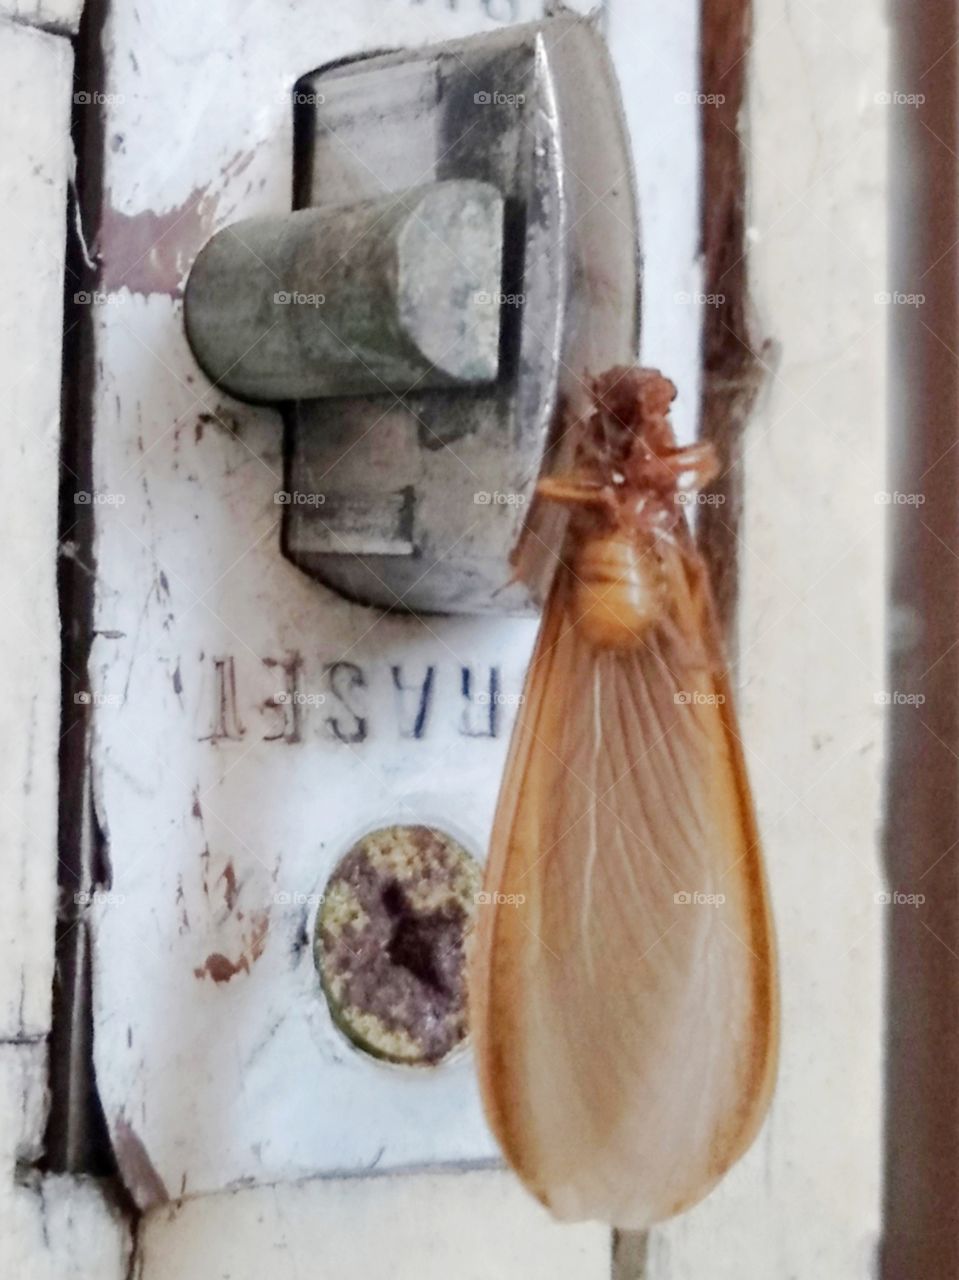 Isoptera is hanging by spider silk on the latch.